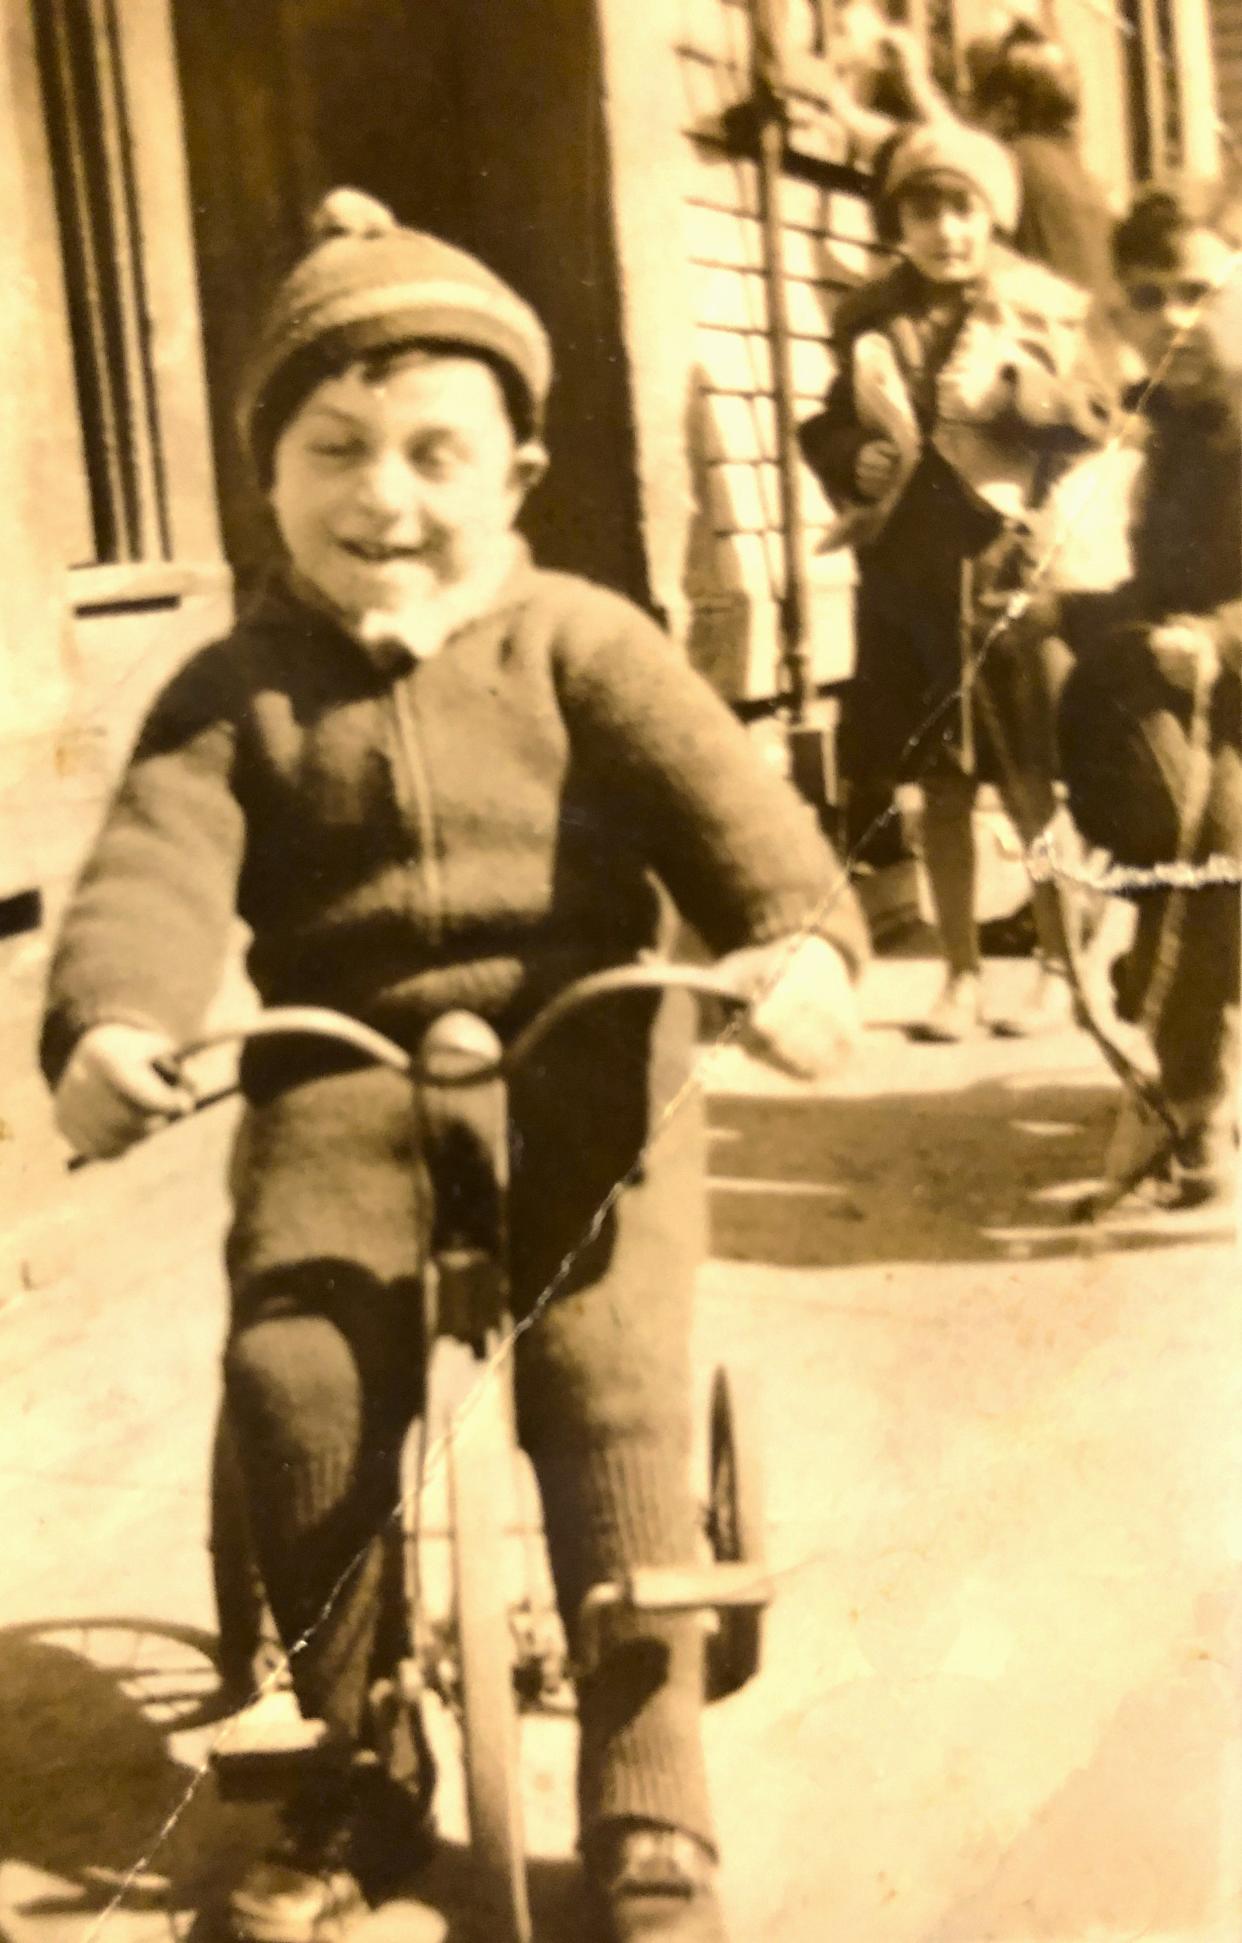 Carmine "Charlie" Mazzulli rides his bike in South Boston with friends.